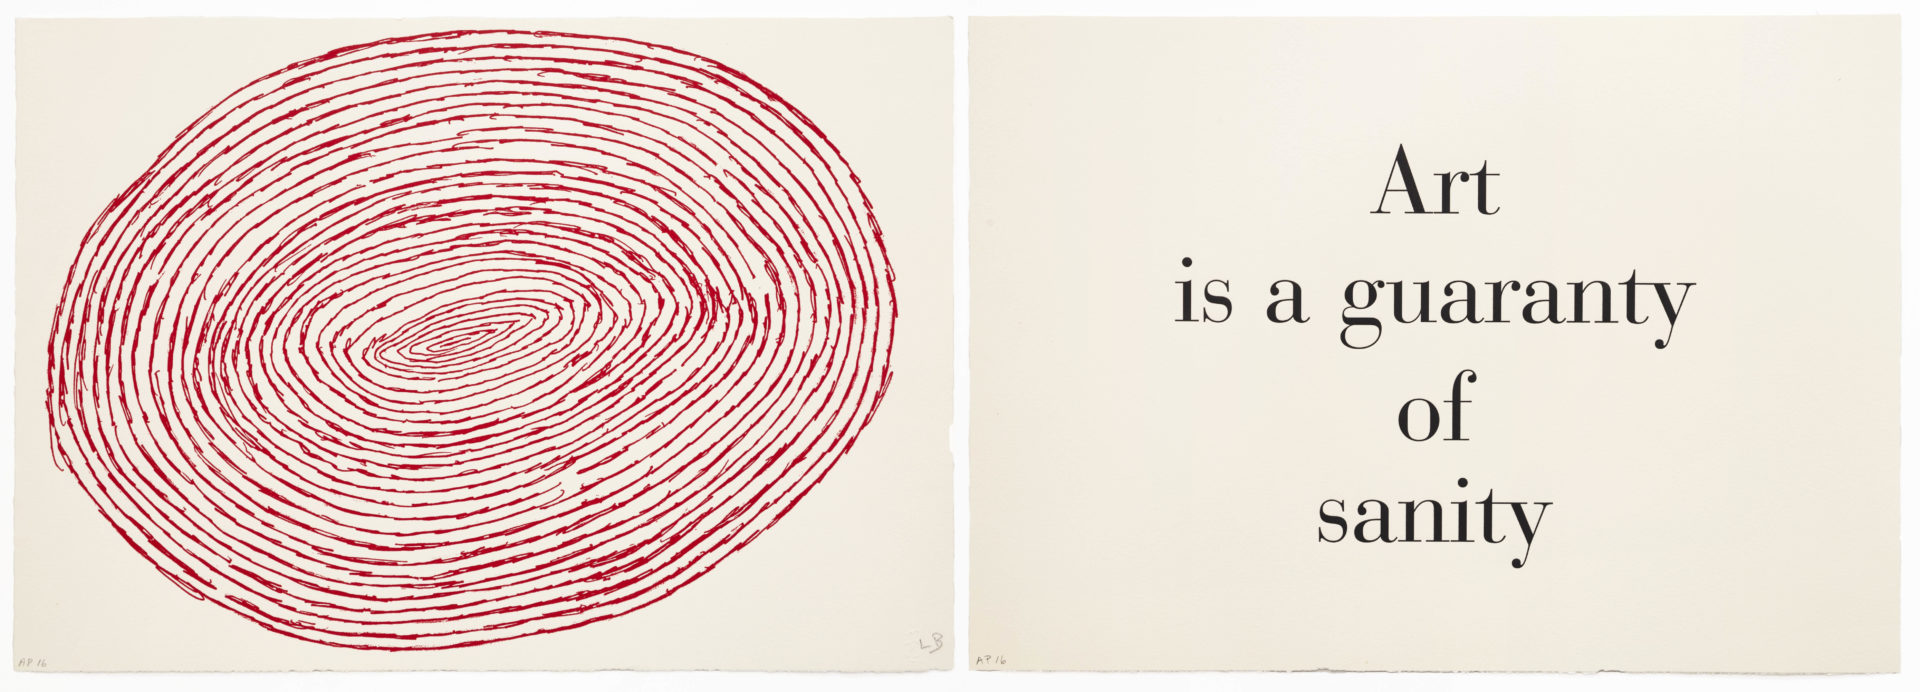 LOUISE BOURGEOIS (b. 1911, Paris, France – d. 2010, New York, NY) Art is a guaranty of sanity (diptych), 1999 Lithograph, letterpress 12 x 17 inches (30.5 x 43.2 cm) each Edition of 25